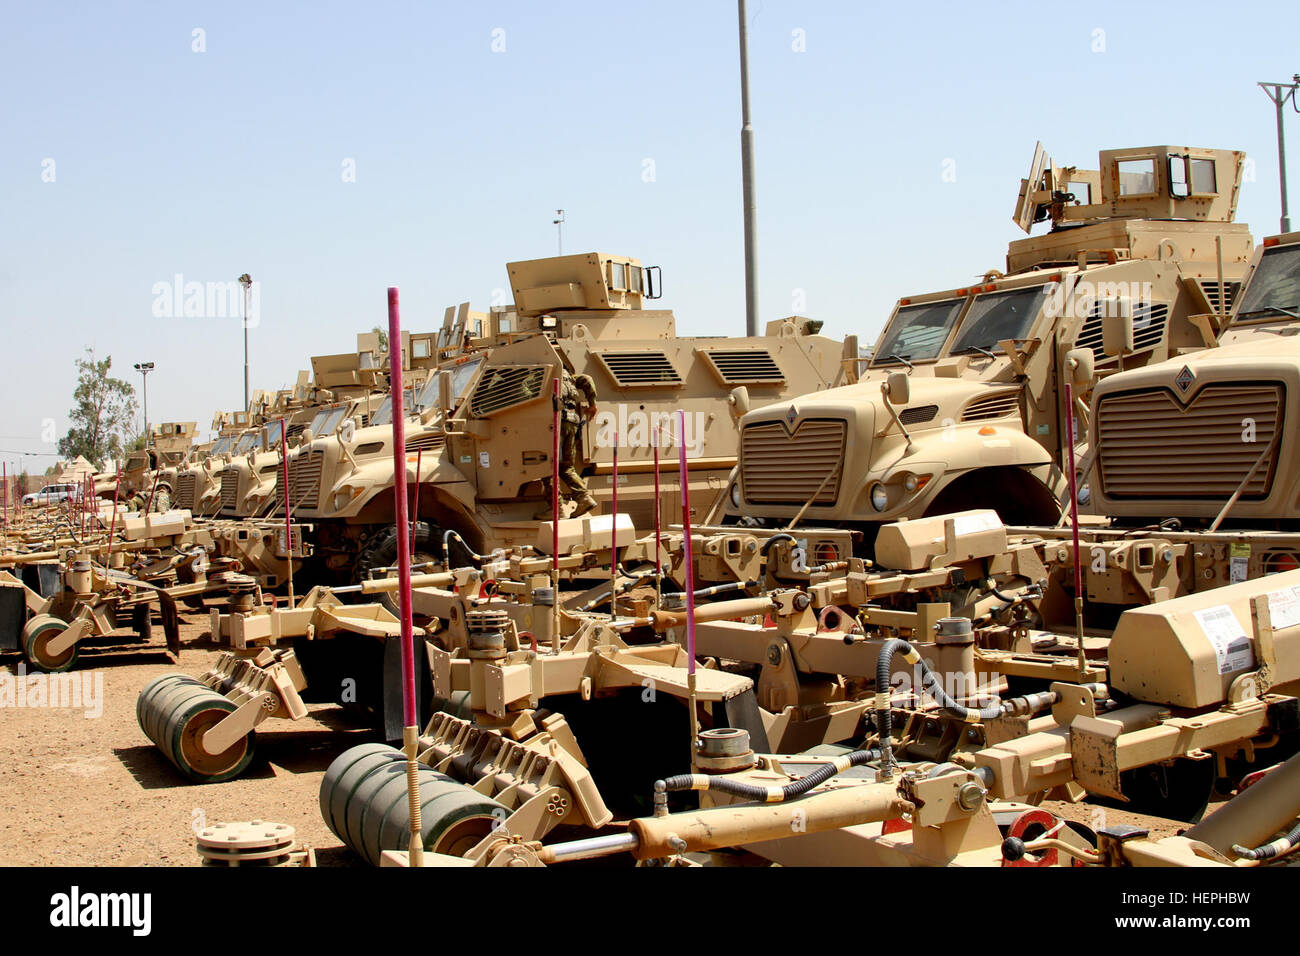 Iraqi security forces receive a shipment of 30 MaxxPro mine-resistant, ambush-protected (MRAP) vehicles with mine-roller attachments at Camp Taji, Iraq, July 13, 2015. The MRAPs are part of the Iraq Train and Equip Fund meant to assist in the fight against the Islamic State of Iraq and the Levant. The 310th Advise and Assist Team, 13th Sustainment Command (Expeditionary) and the 1st Theater Sustainment Command supervised the delivery of the vehicles in support of Combined Joint Task Force – Operation Inherent Resolve. (U.S. Army photo by Staff Sgt. Brian McDermott/Released) Iraqi security forc Stock Photo